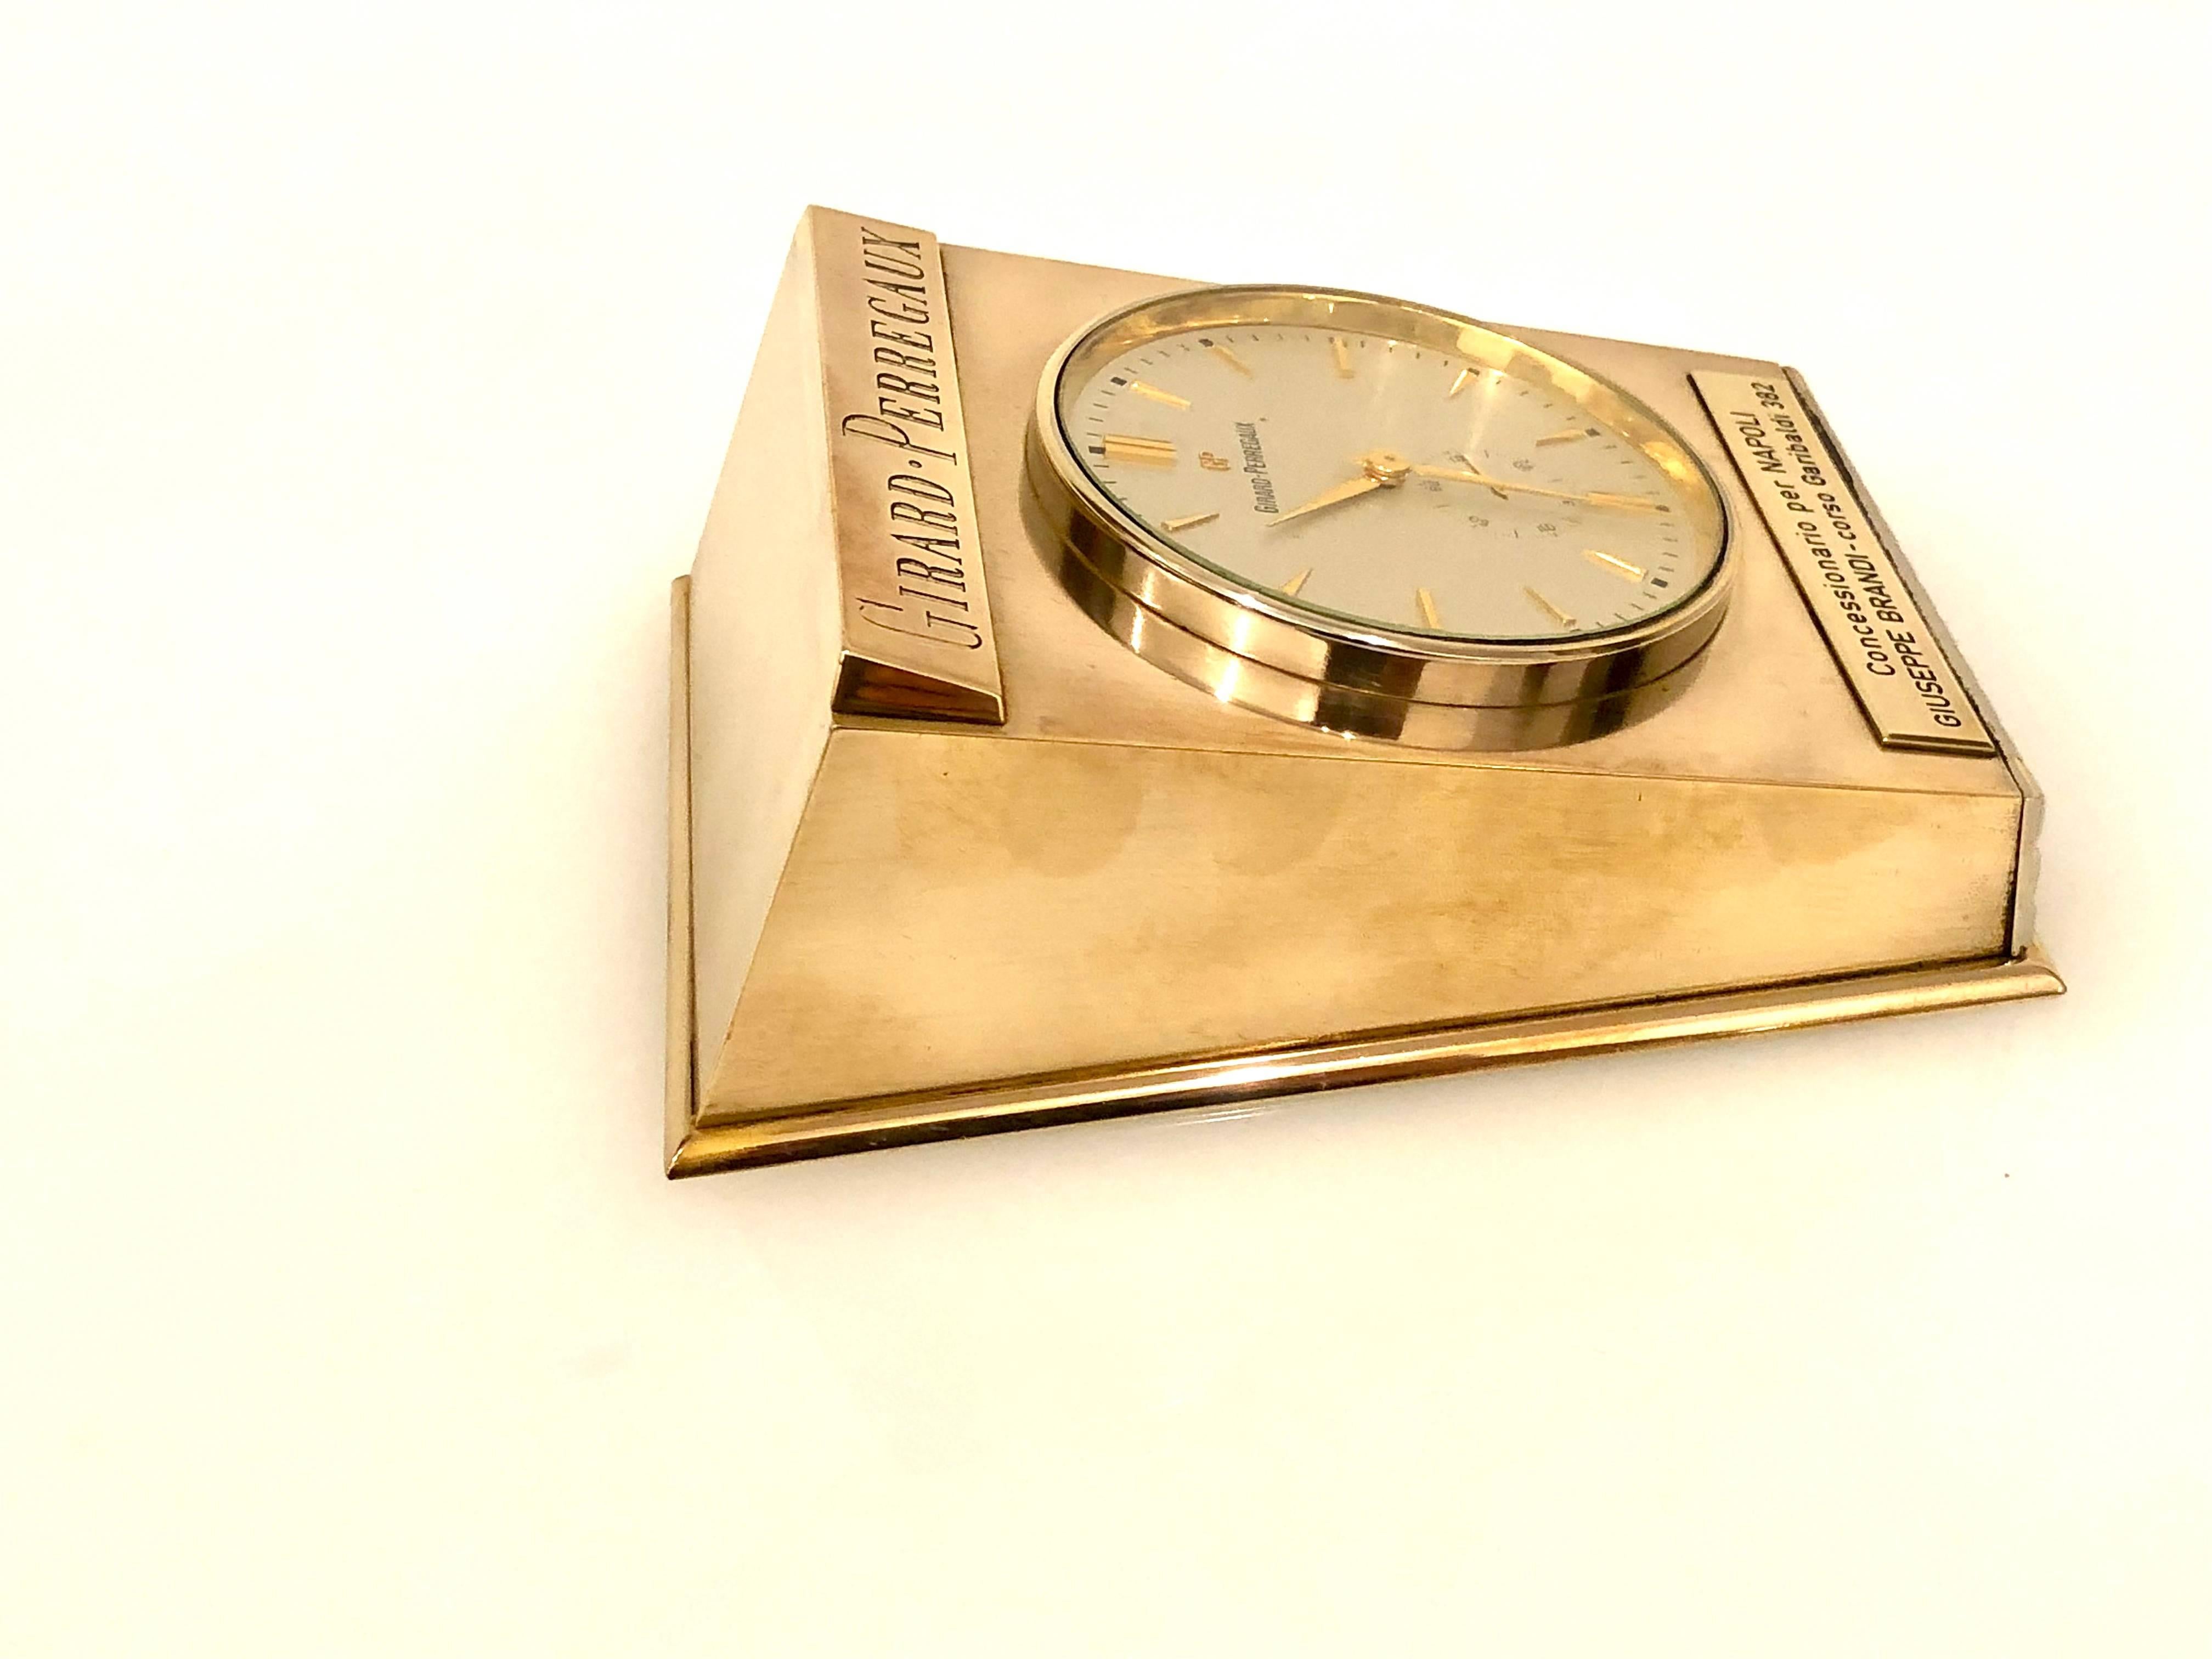 A very rare table clock in polished brass finish, with applied makers and minute indicator, sub seconds, circa 1970s in great condition with plaque on the bottom from an Italian distributor.